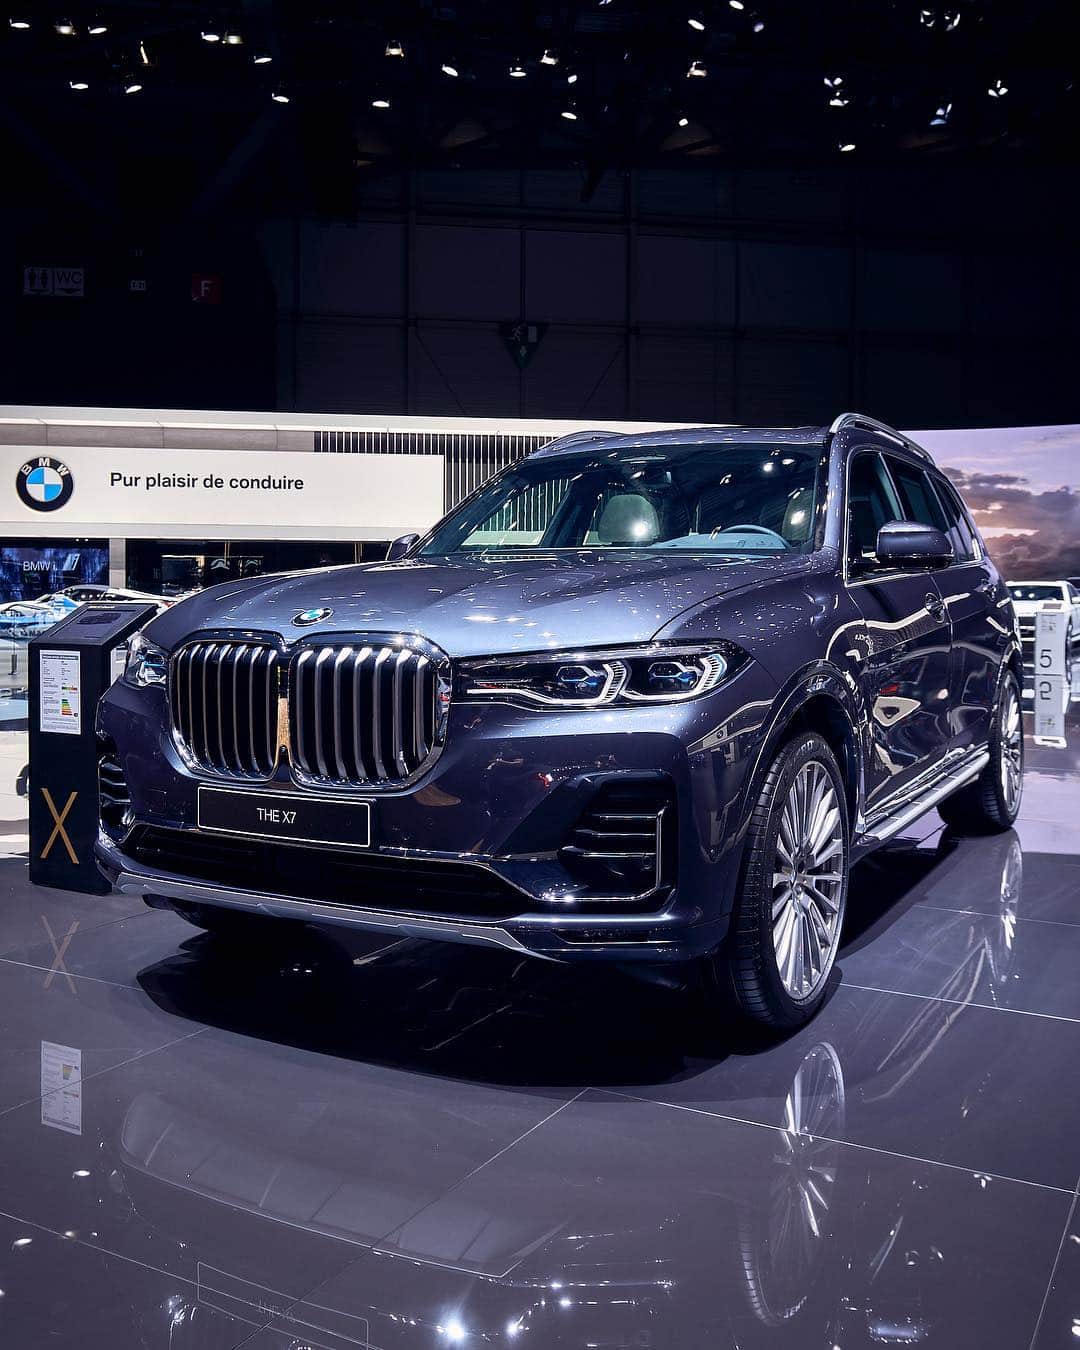 BMWさんのインスタグラム写真 - (BMWInstagram)「As the #GIMSSWISS came to an end hopefully everyone found something pleasing amongst the novelties presented at the show. What was your favorite? #BMW #BMWGIMS __ BMW 330e Sedan: Fuel consumption in l/100 km (combined): from 1.7. CO2 emissions in g/km (combined): from 39.* BMW 530e Sedan: Energy consumption kWh/100 km (combined): 14,1 - 13,1. Fuel consumption in l/100 km (combined): 2.1 - 1.9. CO2 emissions in g/km (combined): 49 - 44. BMW 745e Sedan: Fuel consumption in l/100 km (combined): 2.3; CO2-emissions in g/km (combined): 52 – 48; Energy consumption in kWh/100km (combined): 15.6 – 15.1. BMW X5 xDrive45e: Fuel consumption in l/100 km (combined): 2.1*. Power consumption in kWh/100 km (combined): 23.0*. CO2 emissions in g/km (combined): 49*, exhaust standard: EU6d-TEMP.  BMW Z4 M40i: fuel consumption (combined): 7.4-7.1 l/100 km; CO2 emissions (combined): 168-162 g/km* BMW M2 Competition: Fuel consumption in l/100 km (combined): 9.8 - 9.0. CO2 emissions (combined) in g/km: 224 - 206. *All performance, fuel consumption and emissions figures are provisional.  The values of fuel consumptions, CO2 emissions and energy consumptions shown were determined according to the European Regulation (EC) 715/2007 in the version applicable at the time of type approval. The figures refer to a vehicle with basic configuration in Germany and the range shown considers optional equipment and the different size of wheels and tires available on the selected model. The values are already based on the new WLTP regulation and are translated back into NEDC-equivalent values in order to ensure the comparison between the vehicles. [With respect to these vehicles, for vehicle related taxes or other duties based (at least inter alia) on CO2-emissions the CO2 values may differ to the values stated here.] The CO2 efficiency specifications are determined according to Directive 1999/94/EC and the European Regulation in its current version applicable. The values shown are based on the fuel consumption, CO2 values and energy consumptions according to the NEDC cycle for the classification. For further information about the official fuel consumption and the specific CO2 emission of new passenger」3月18日 6時36分 - bmw